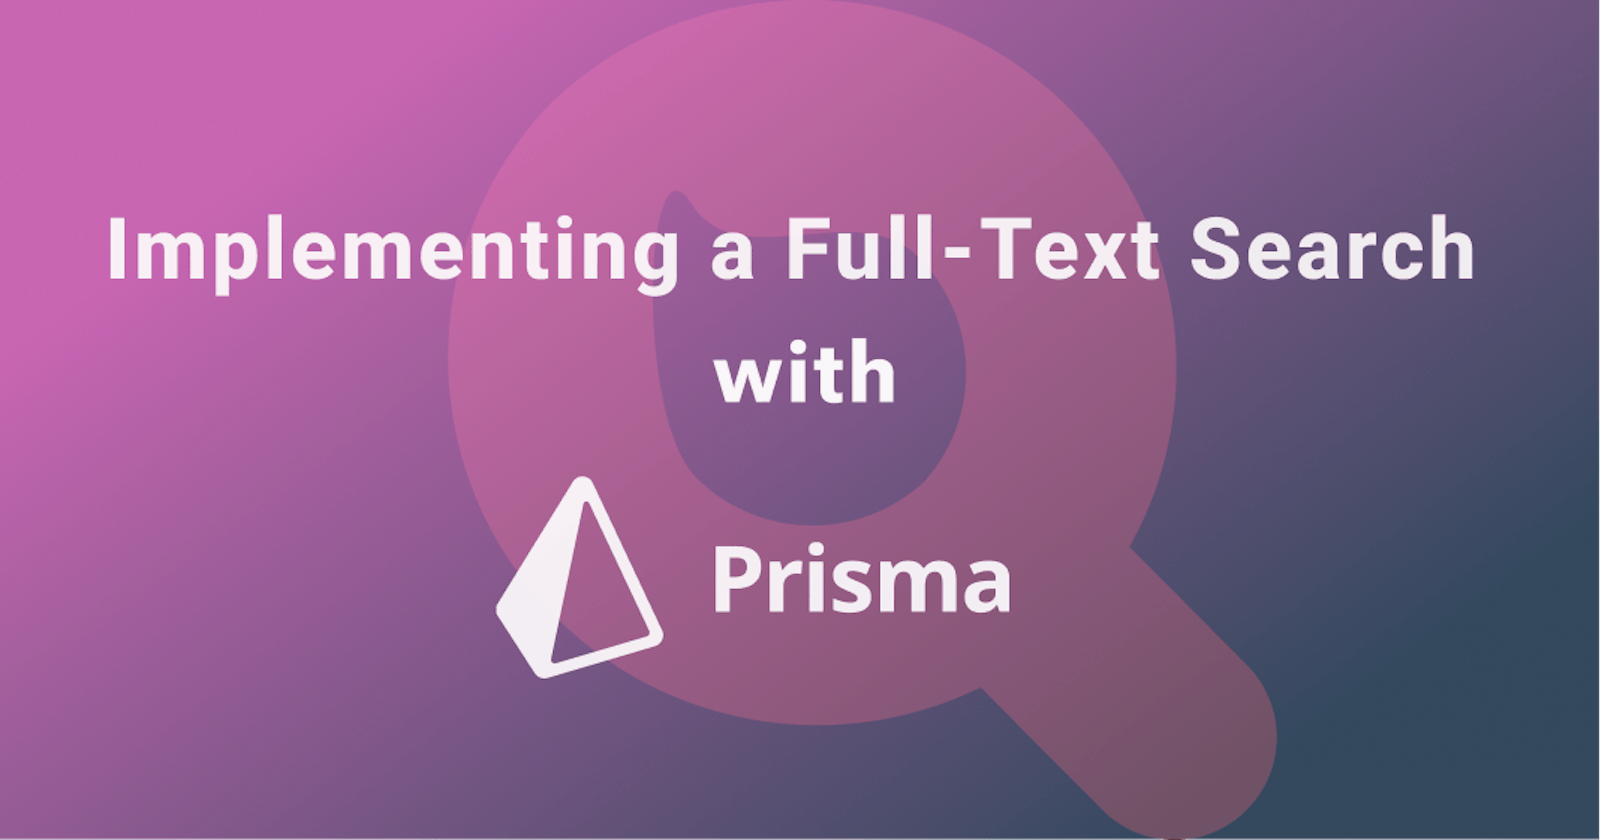 How to Implement a Full-Text Search with Prisma